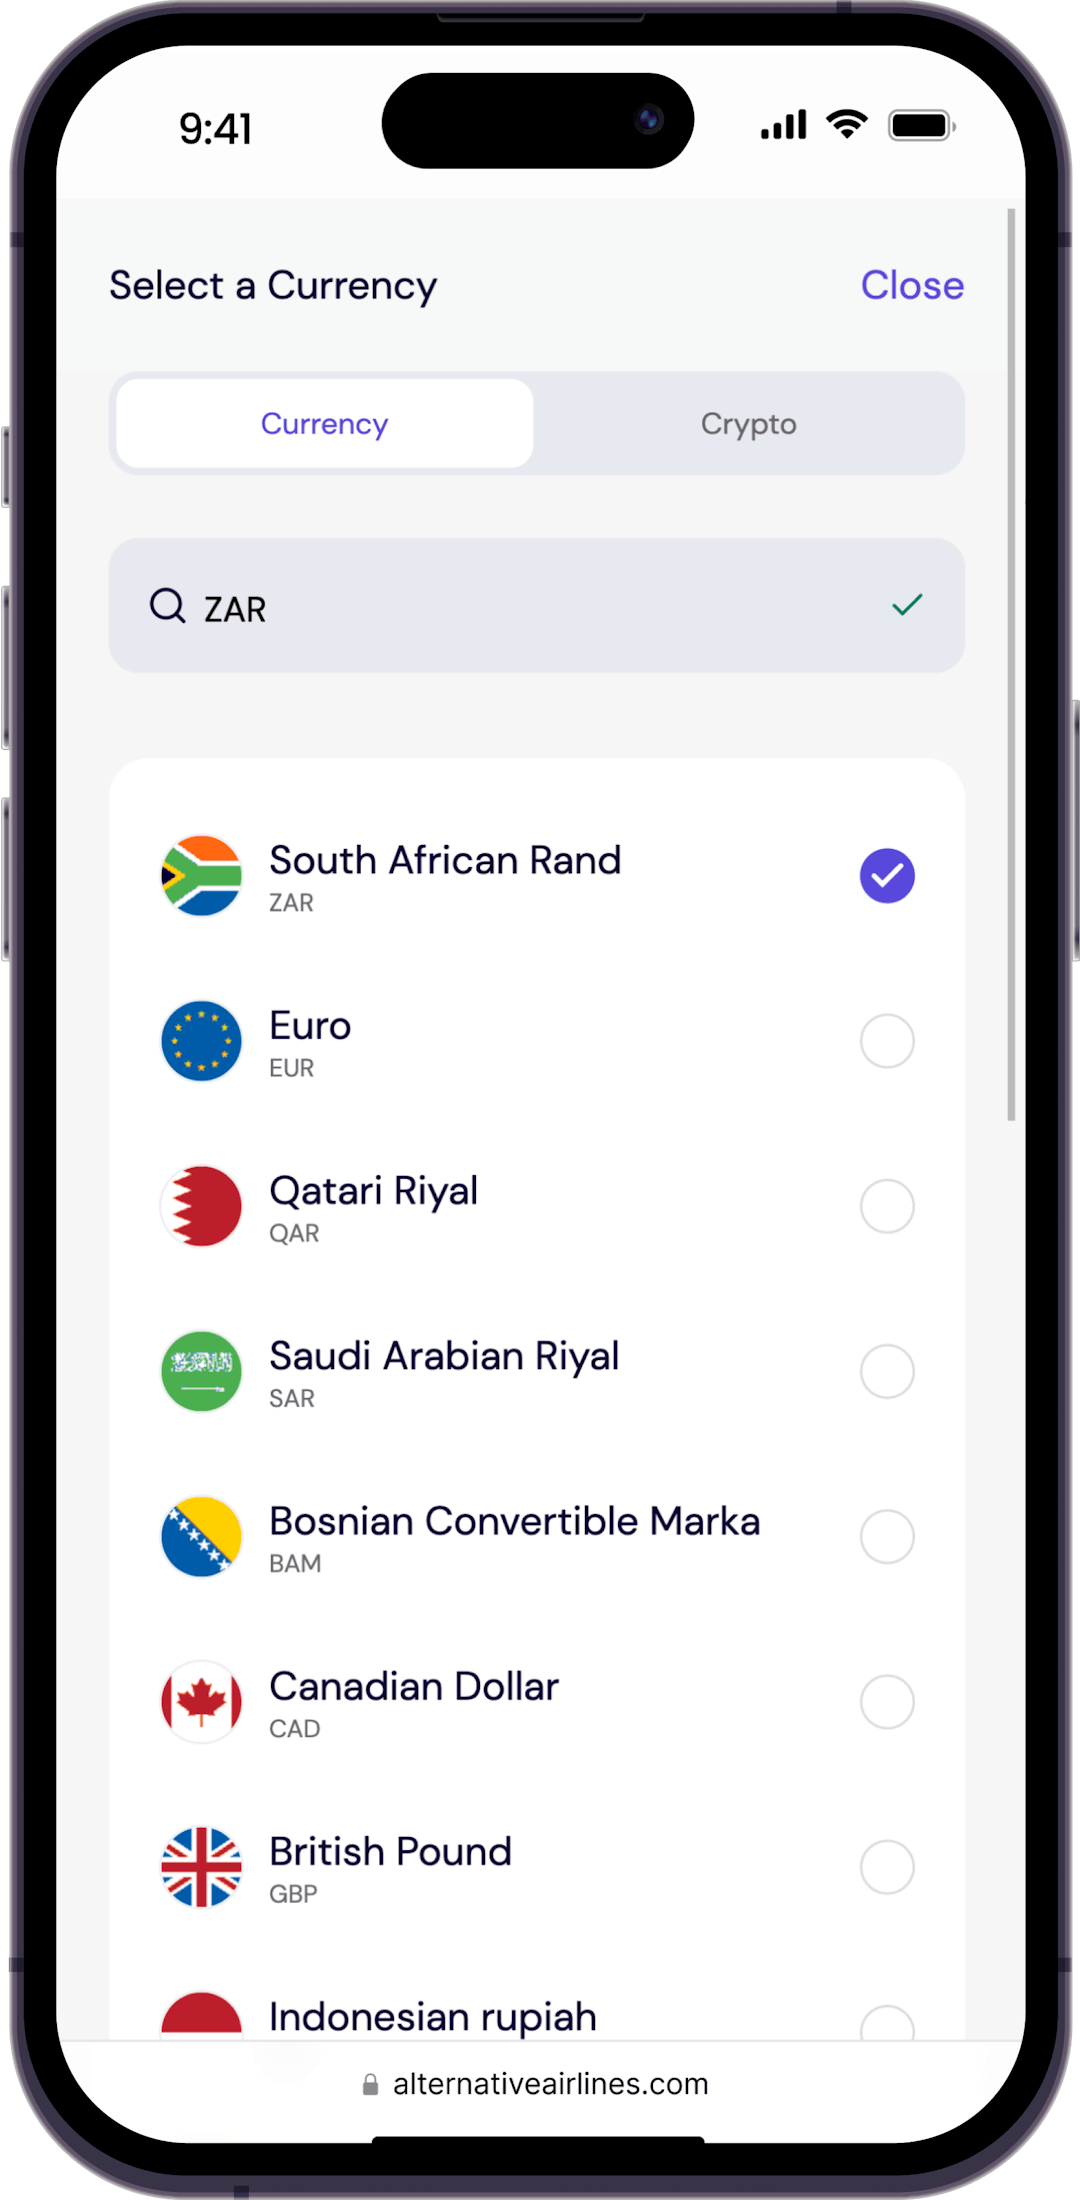 Step 2 - Select 'ZAR' as your preferred payment option